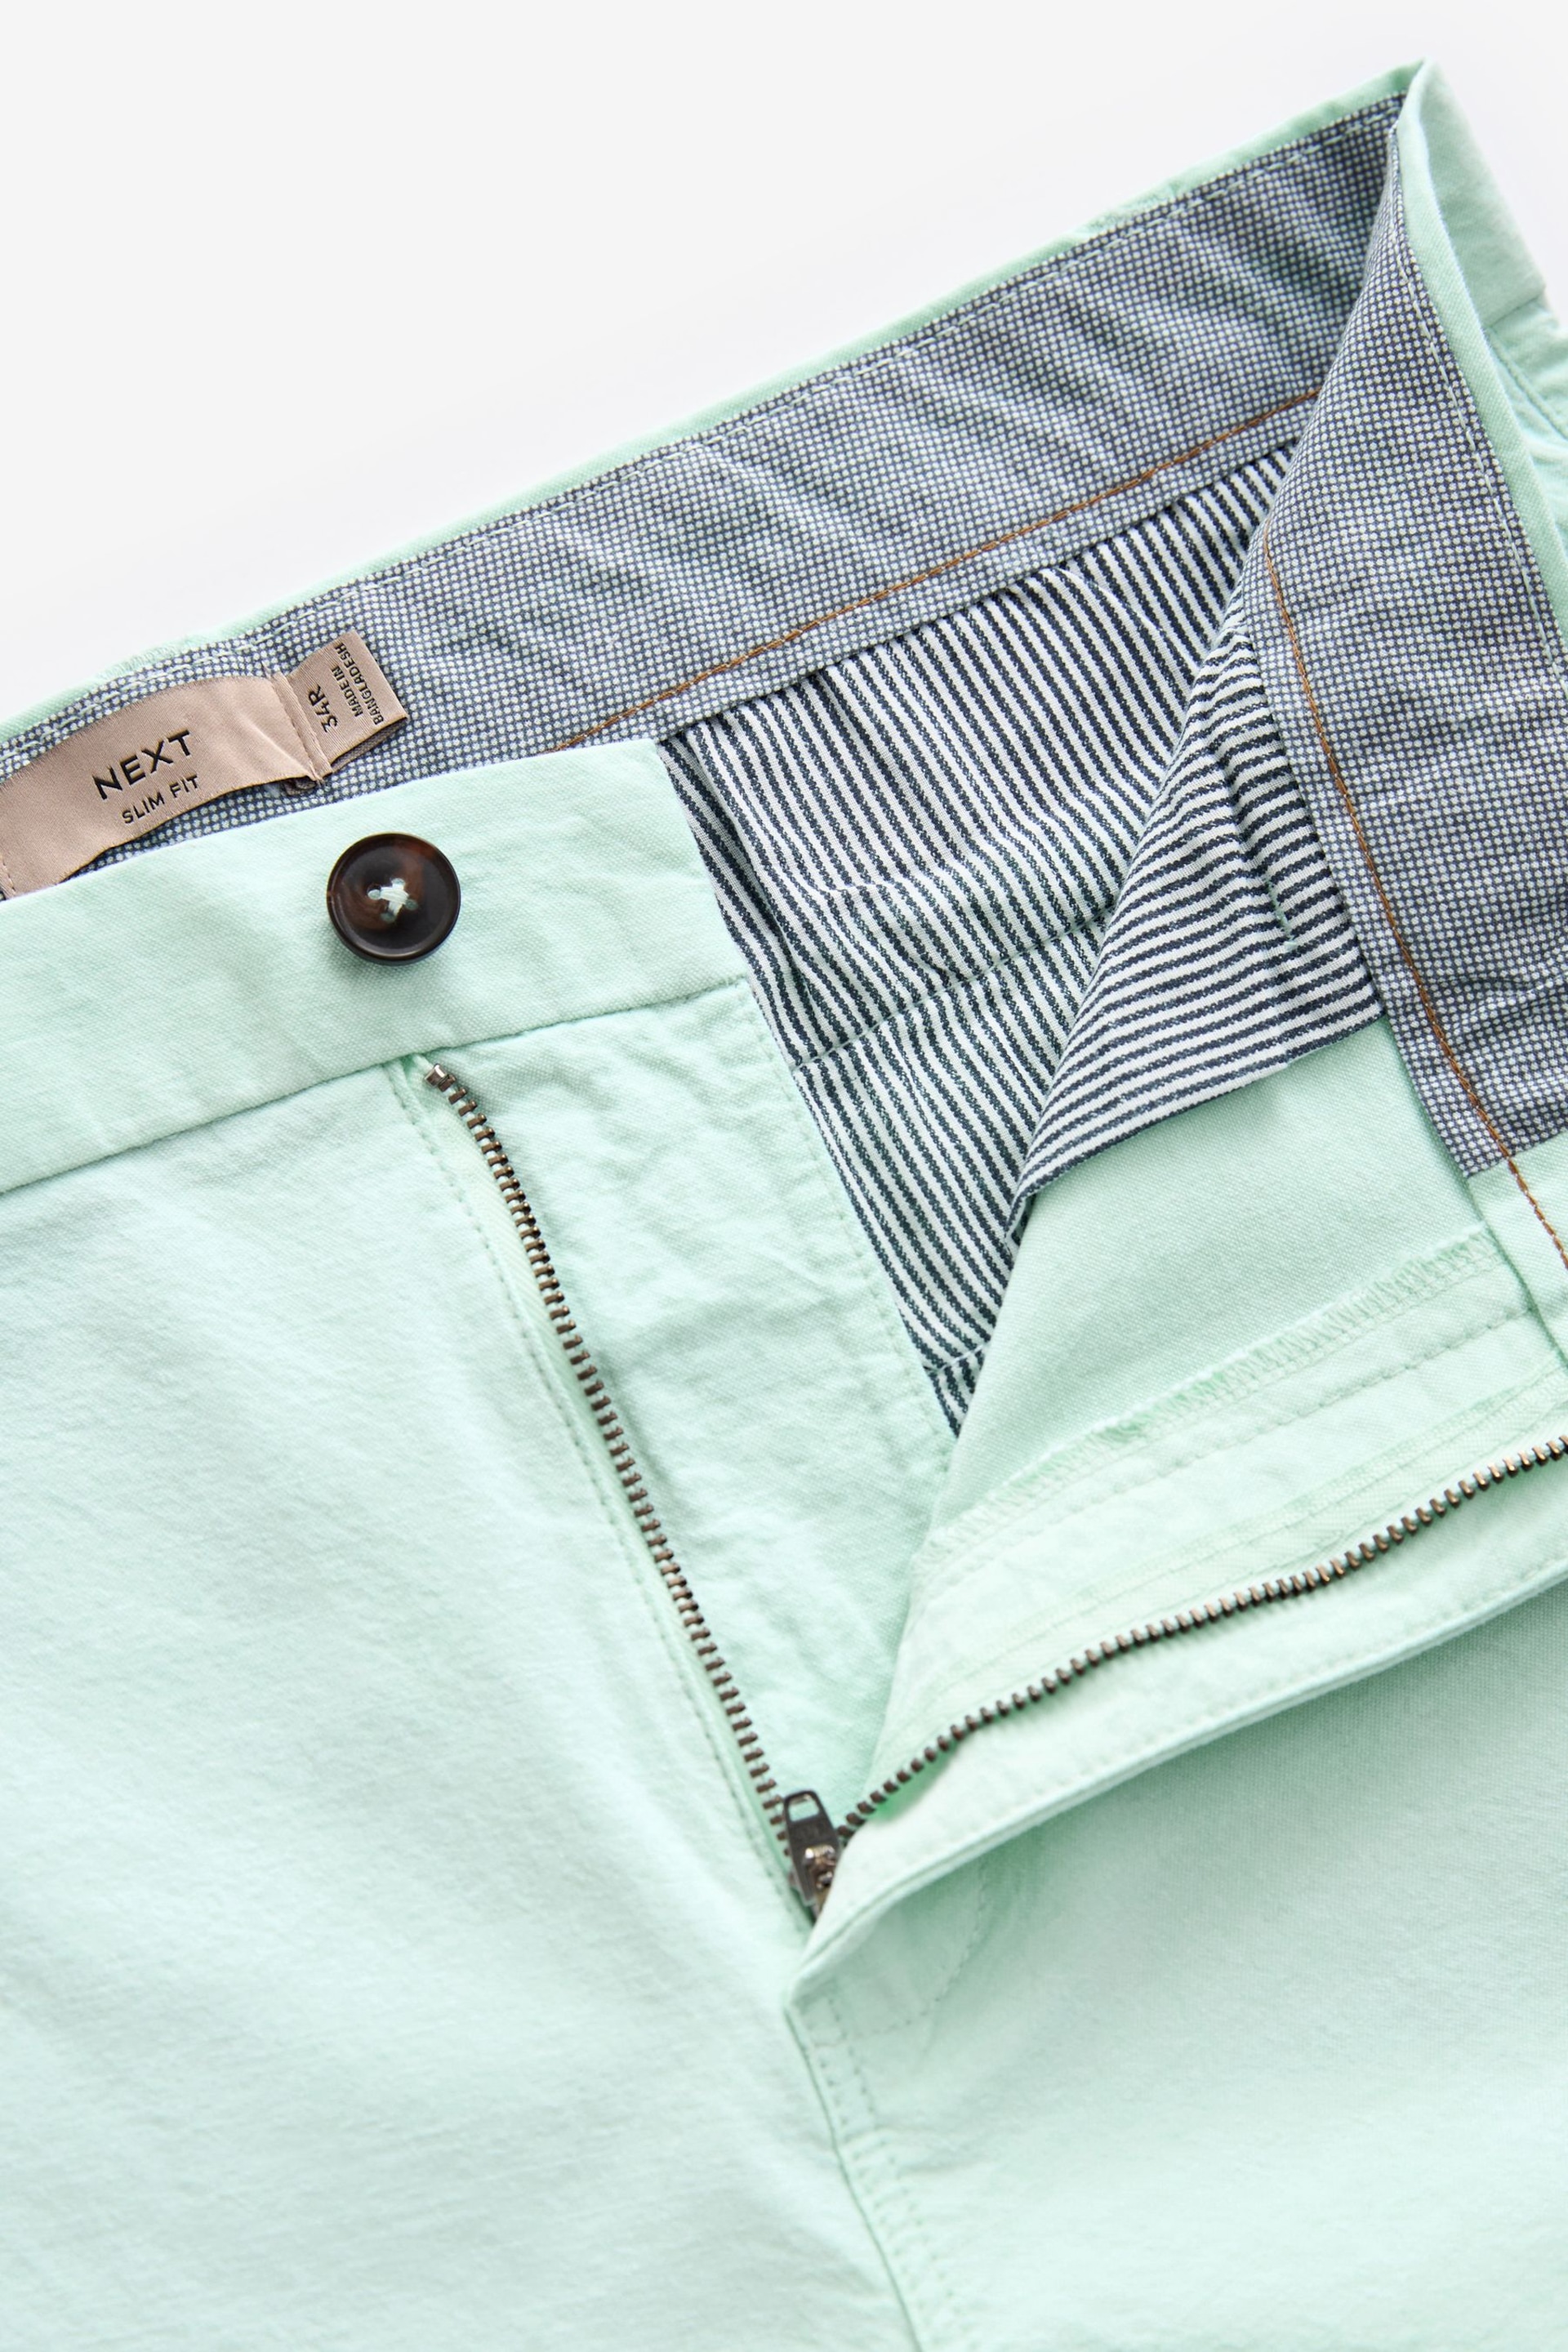 Mint Green Slim Fit Stretch Chinos Shorts - Image 7 of 8